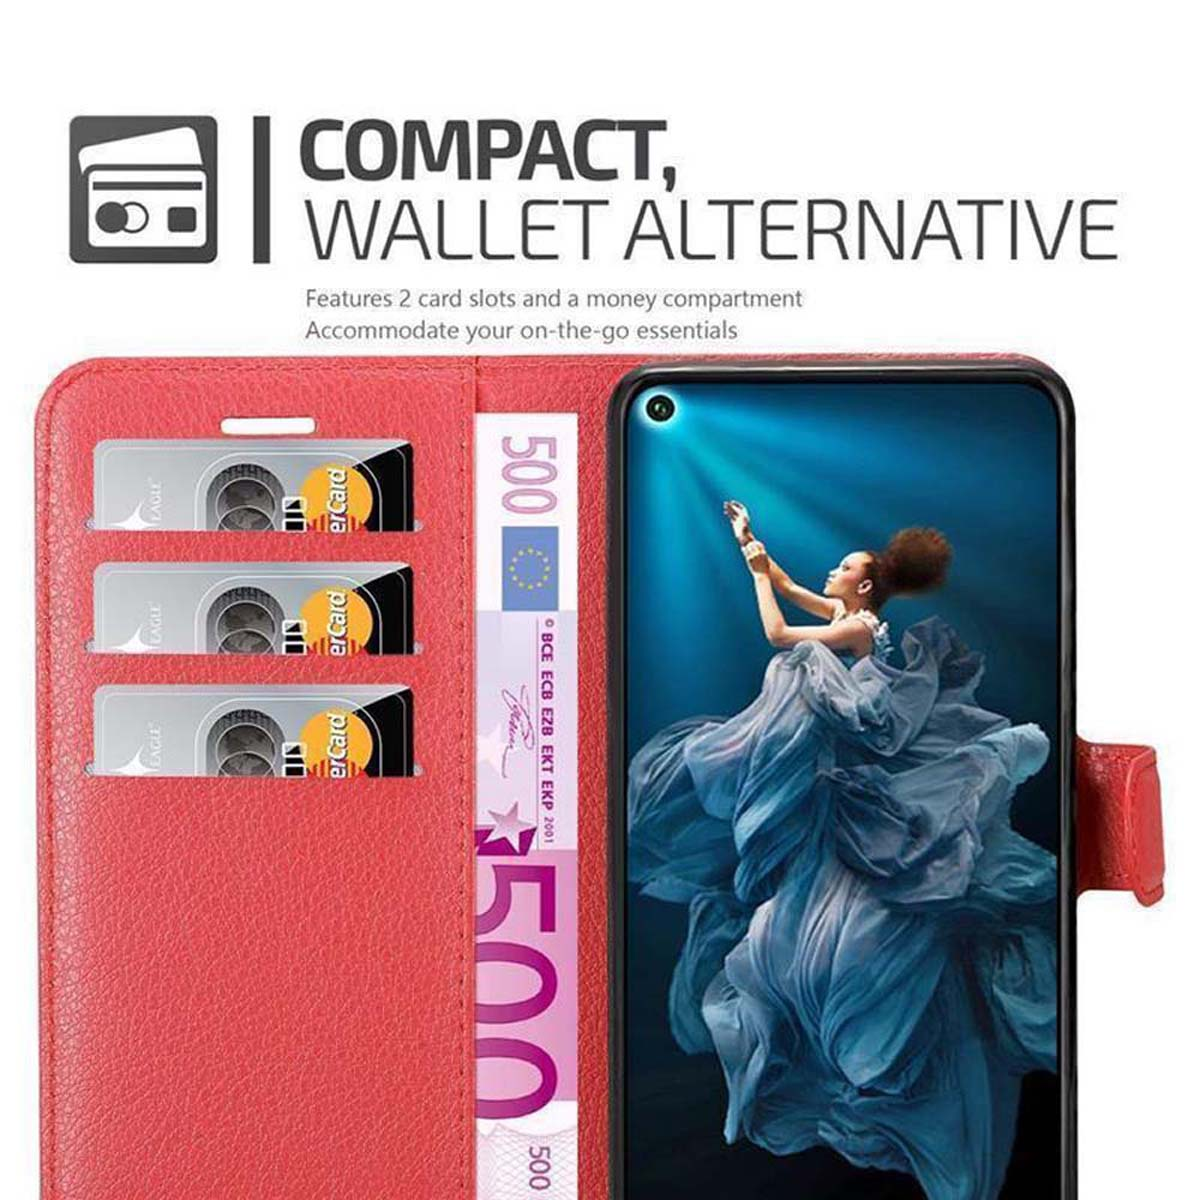 20S 20 / KARMIN 5T, Book Huawei / Honor, CADORABO Hülle Bookcover, ROT NOVA Standfunktion,